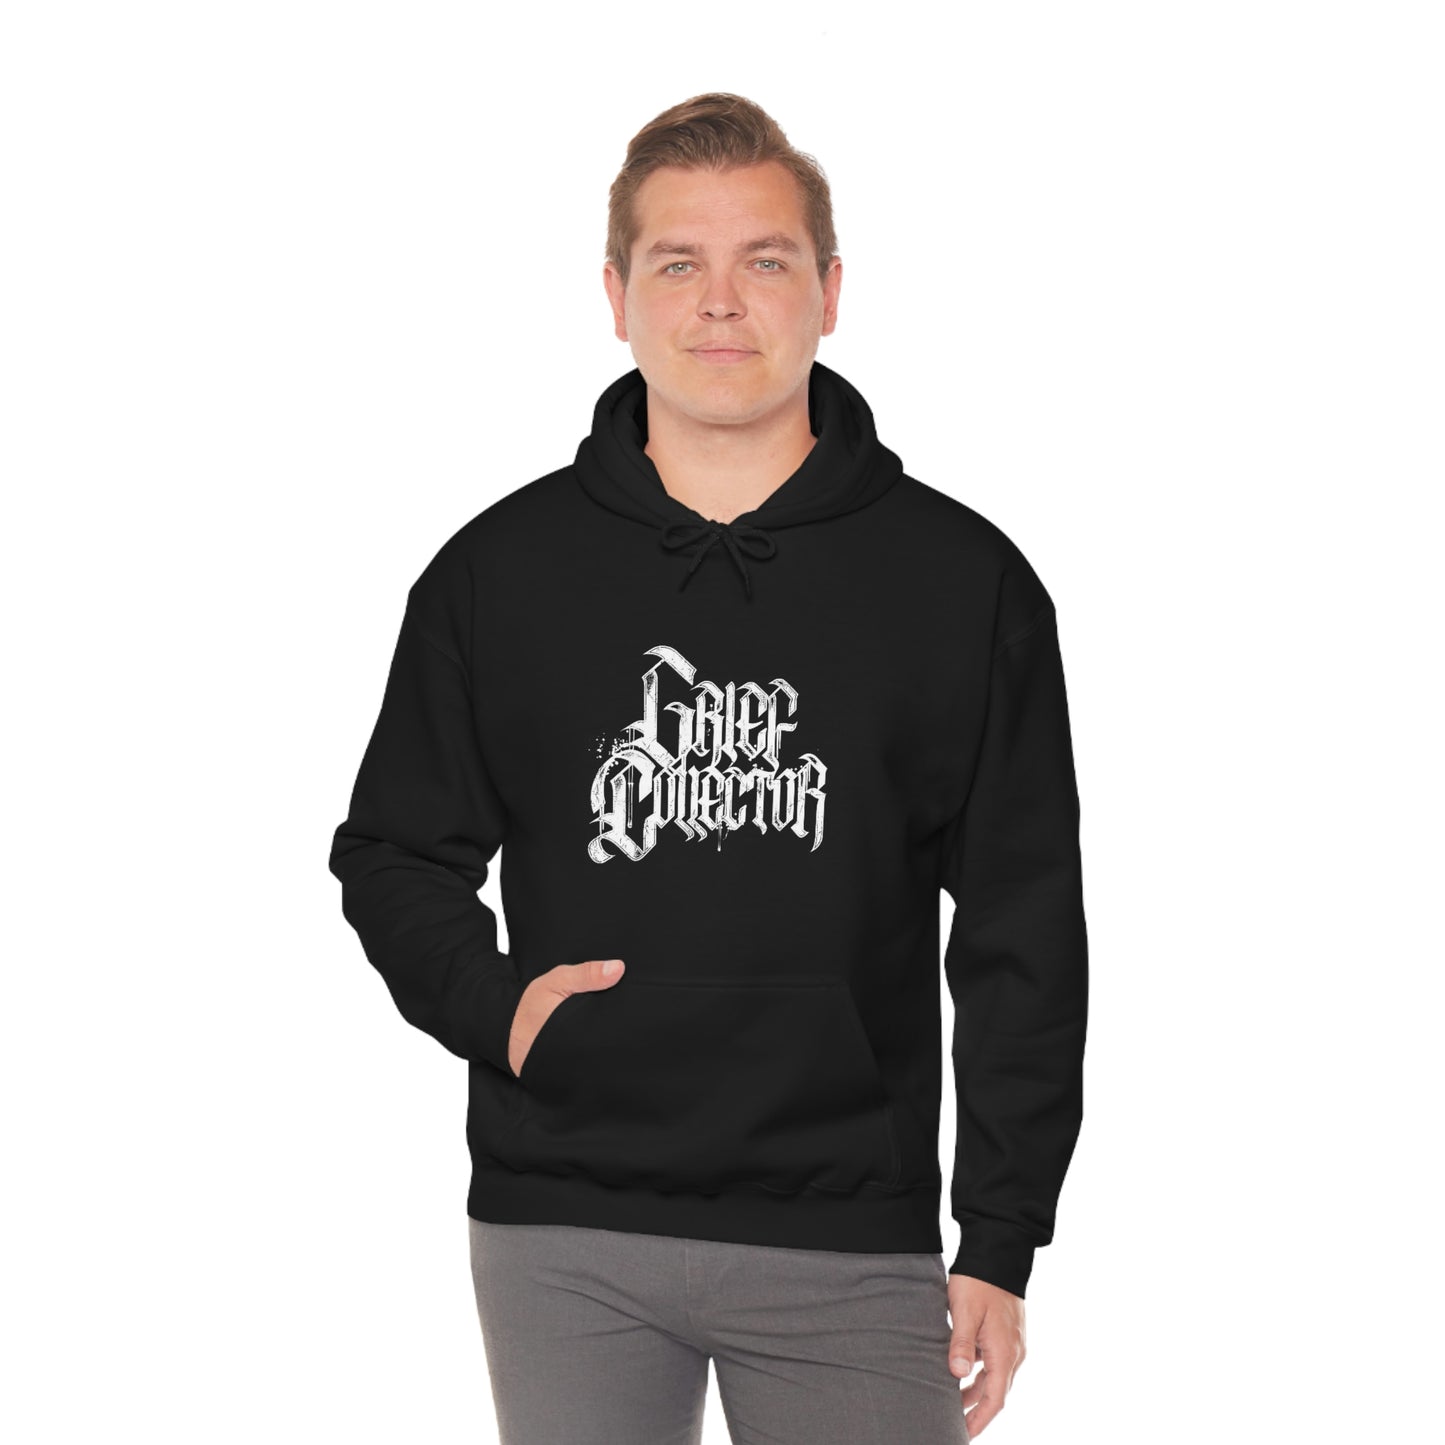 Grief Collector - Tombs of Tomorrow - Hoodie